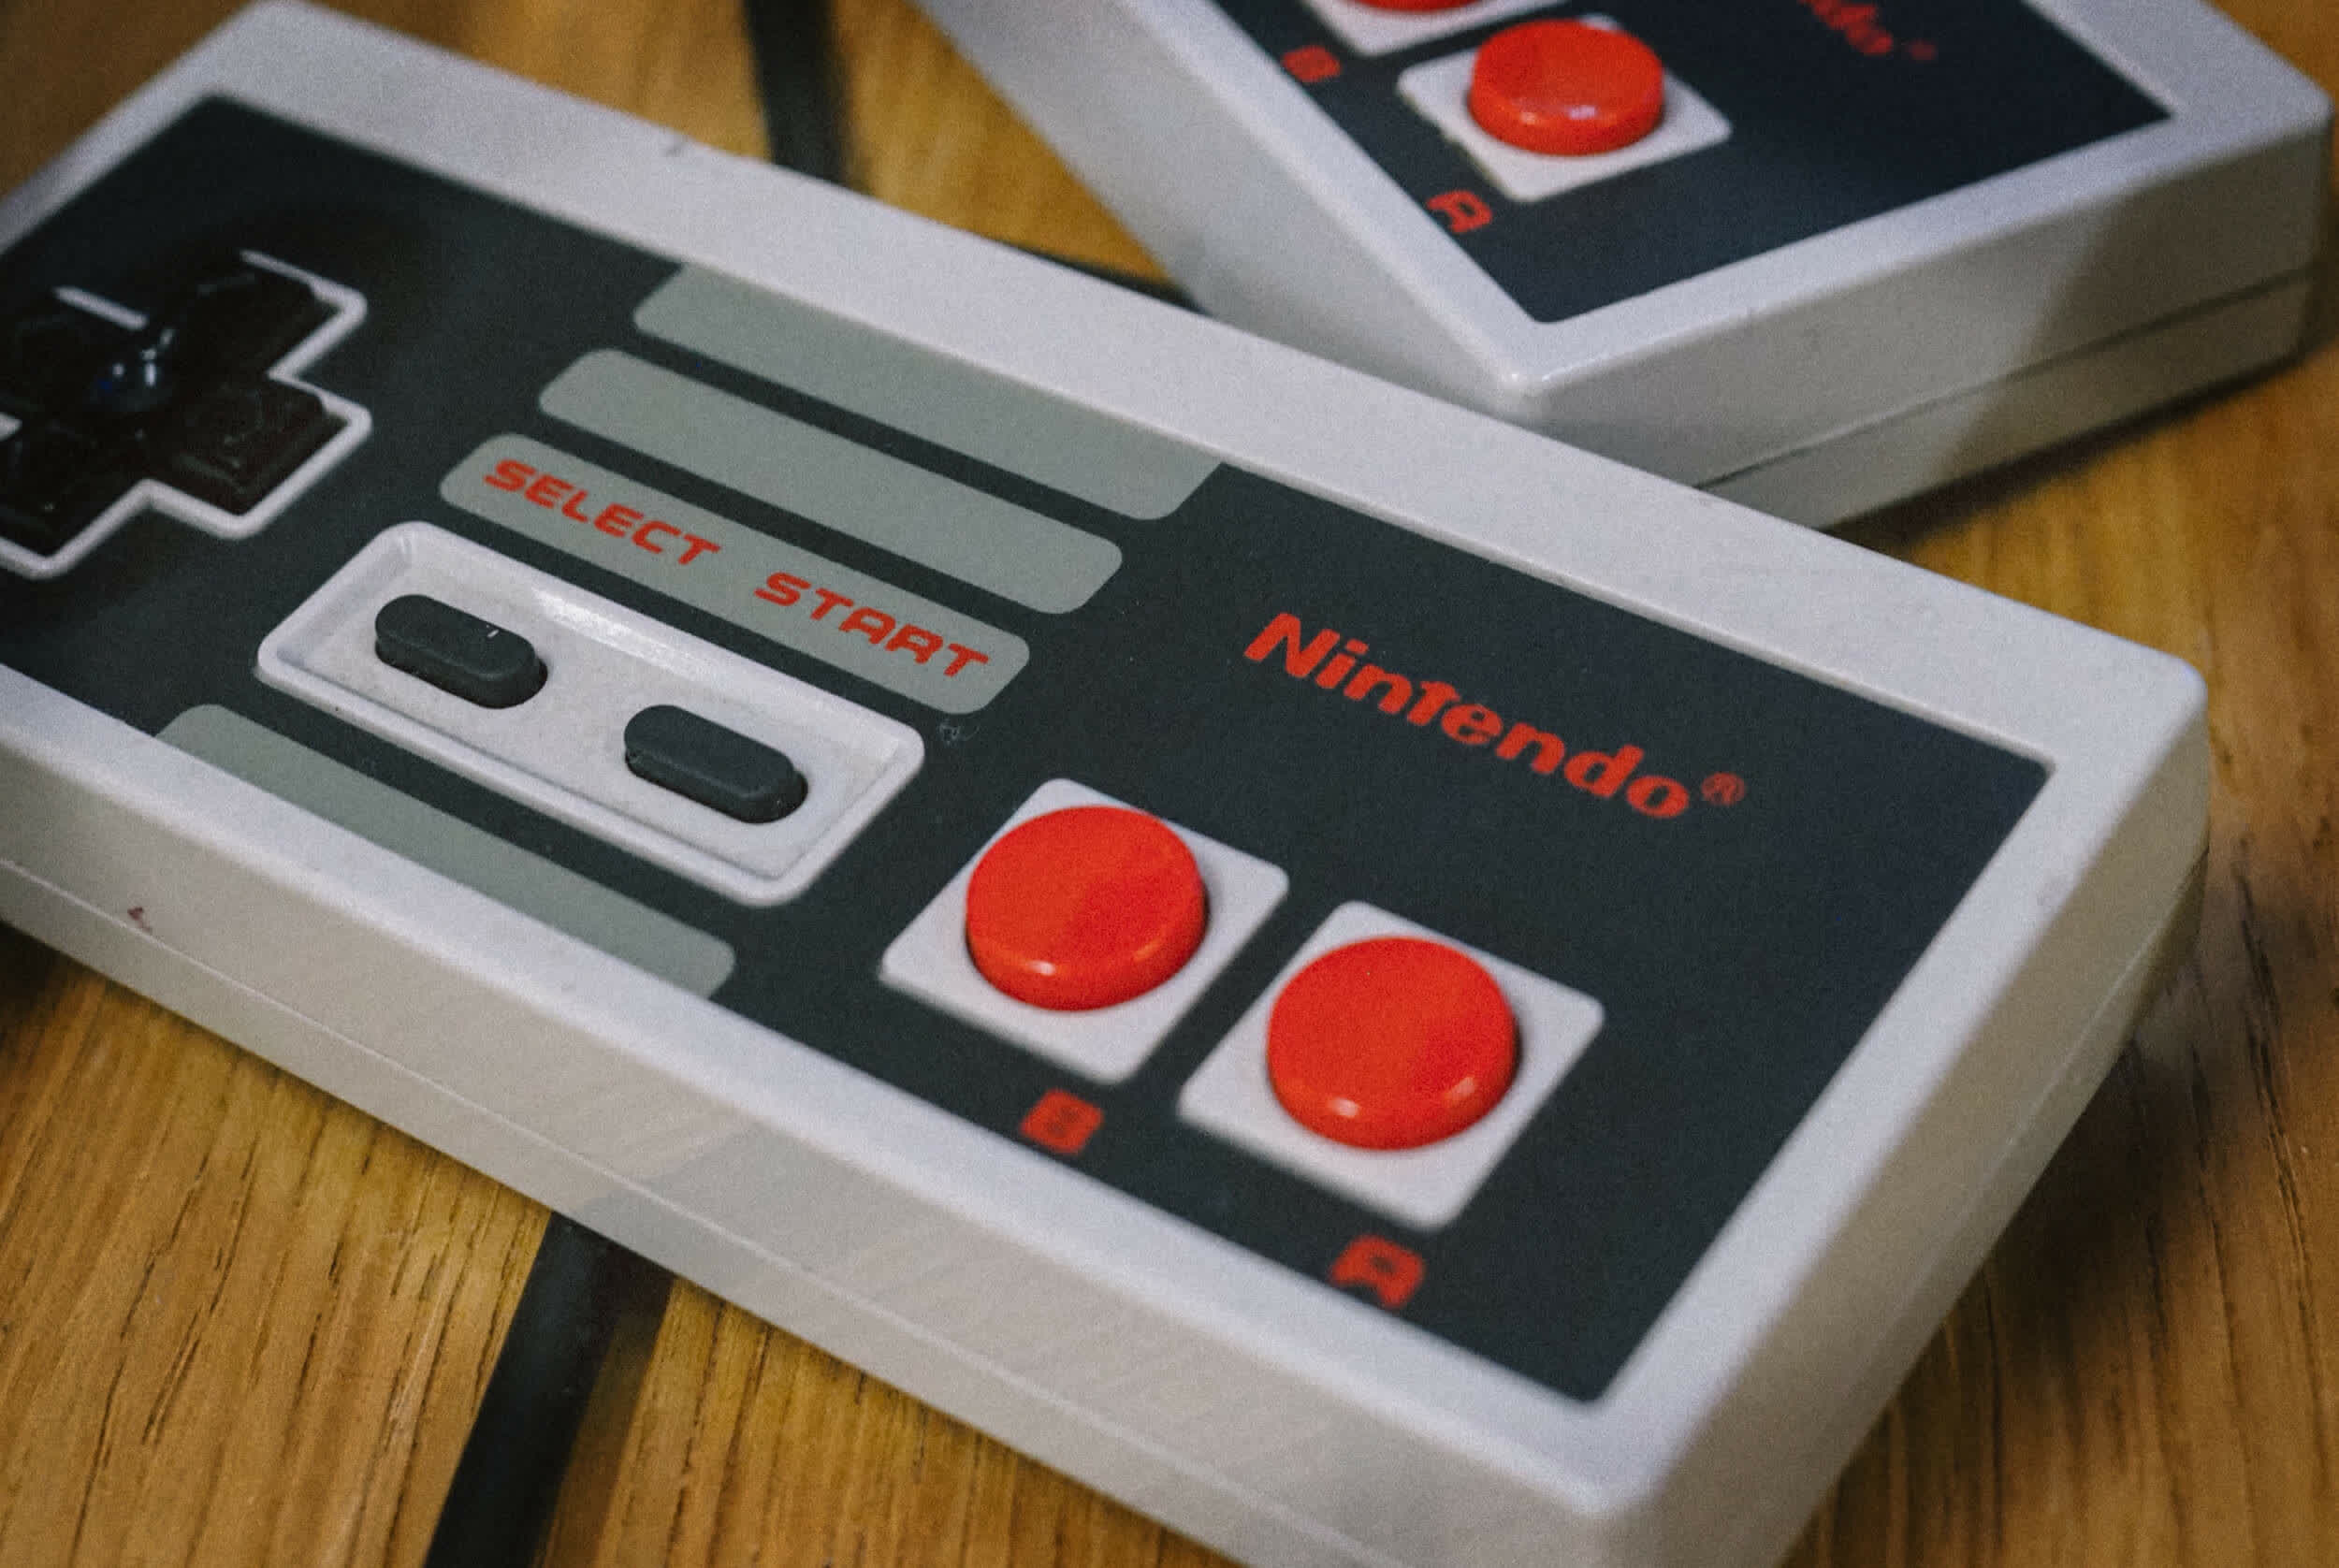 Palm-sized NES clone plays classic cartridges using the same chips that powered the original Nintendo